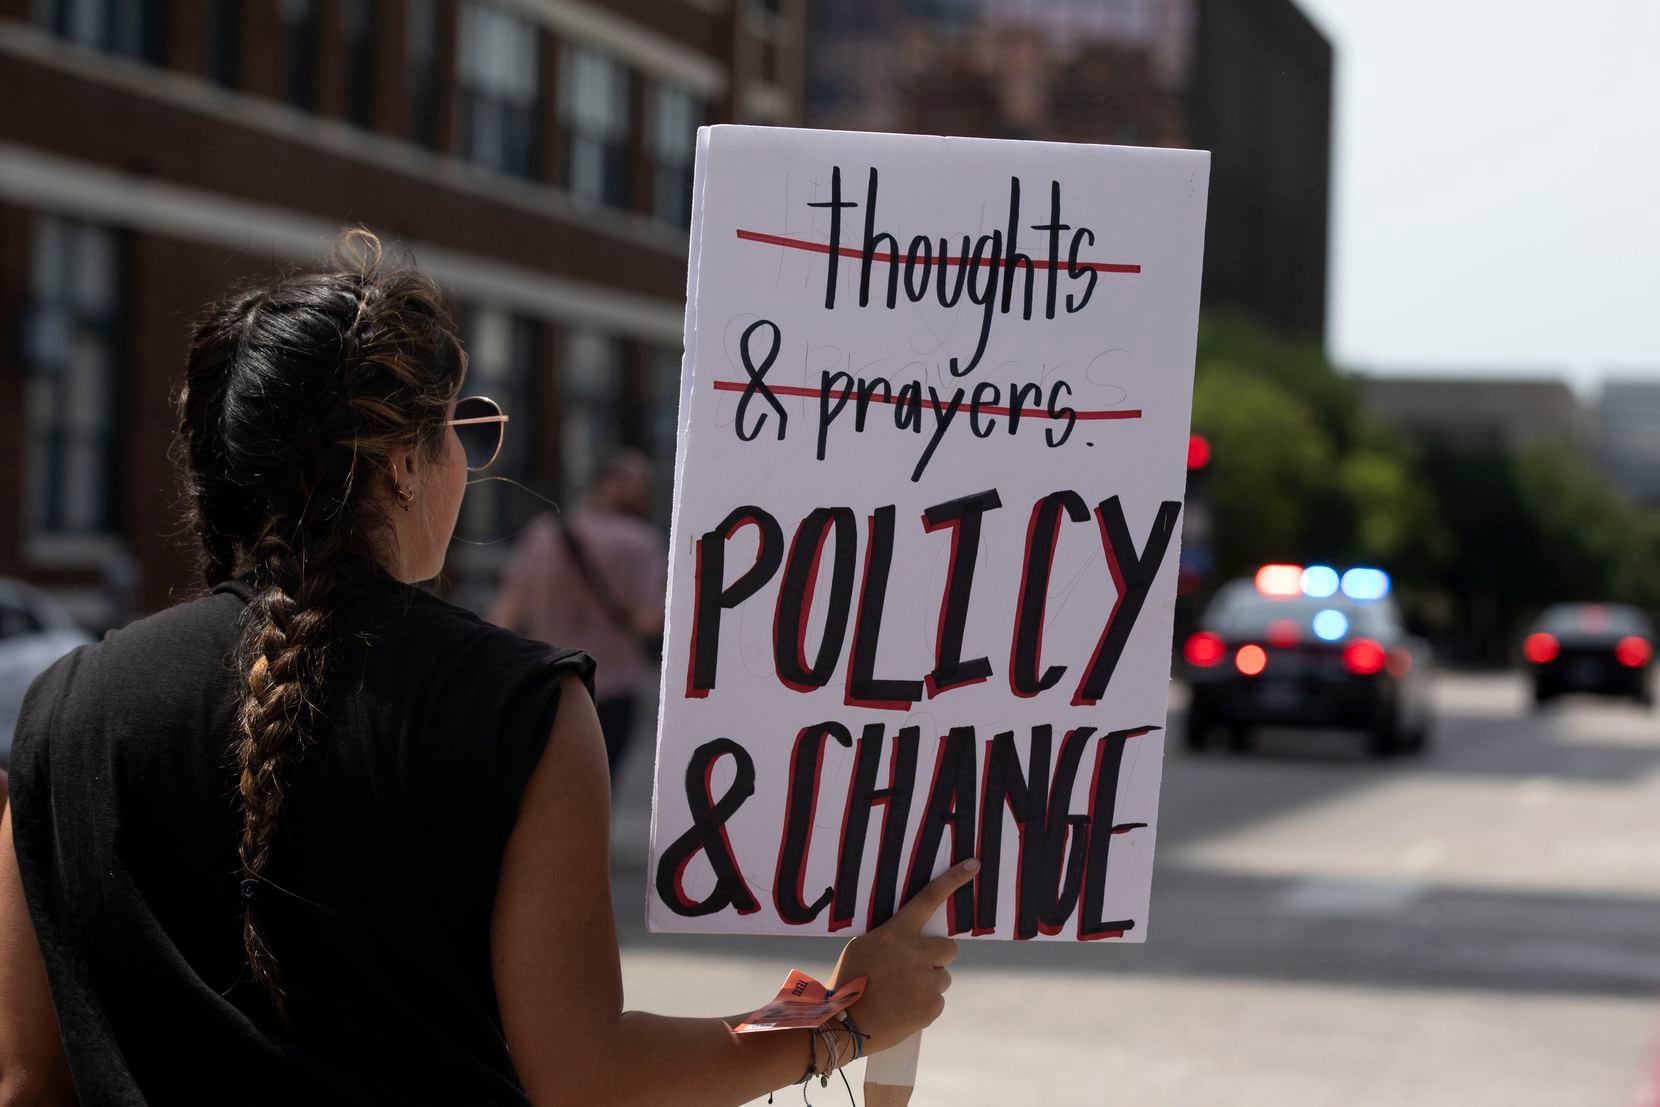 A protester holds a sign calling for policy change during Saturday's demonstration in Dallas.